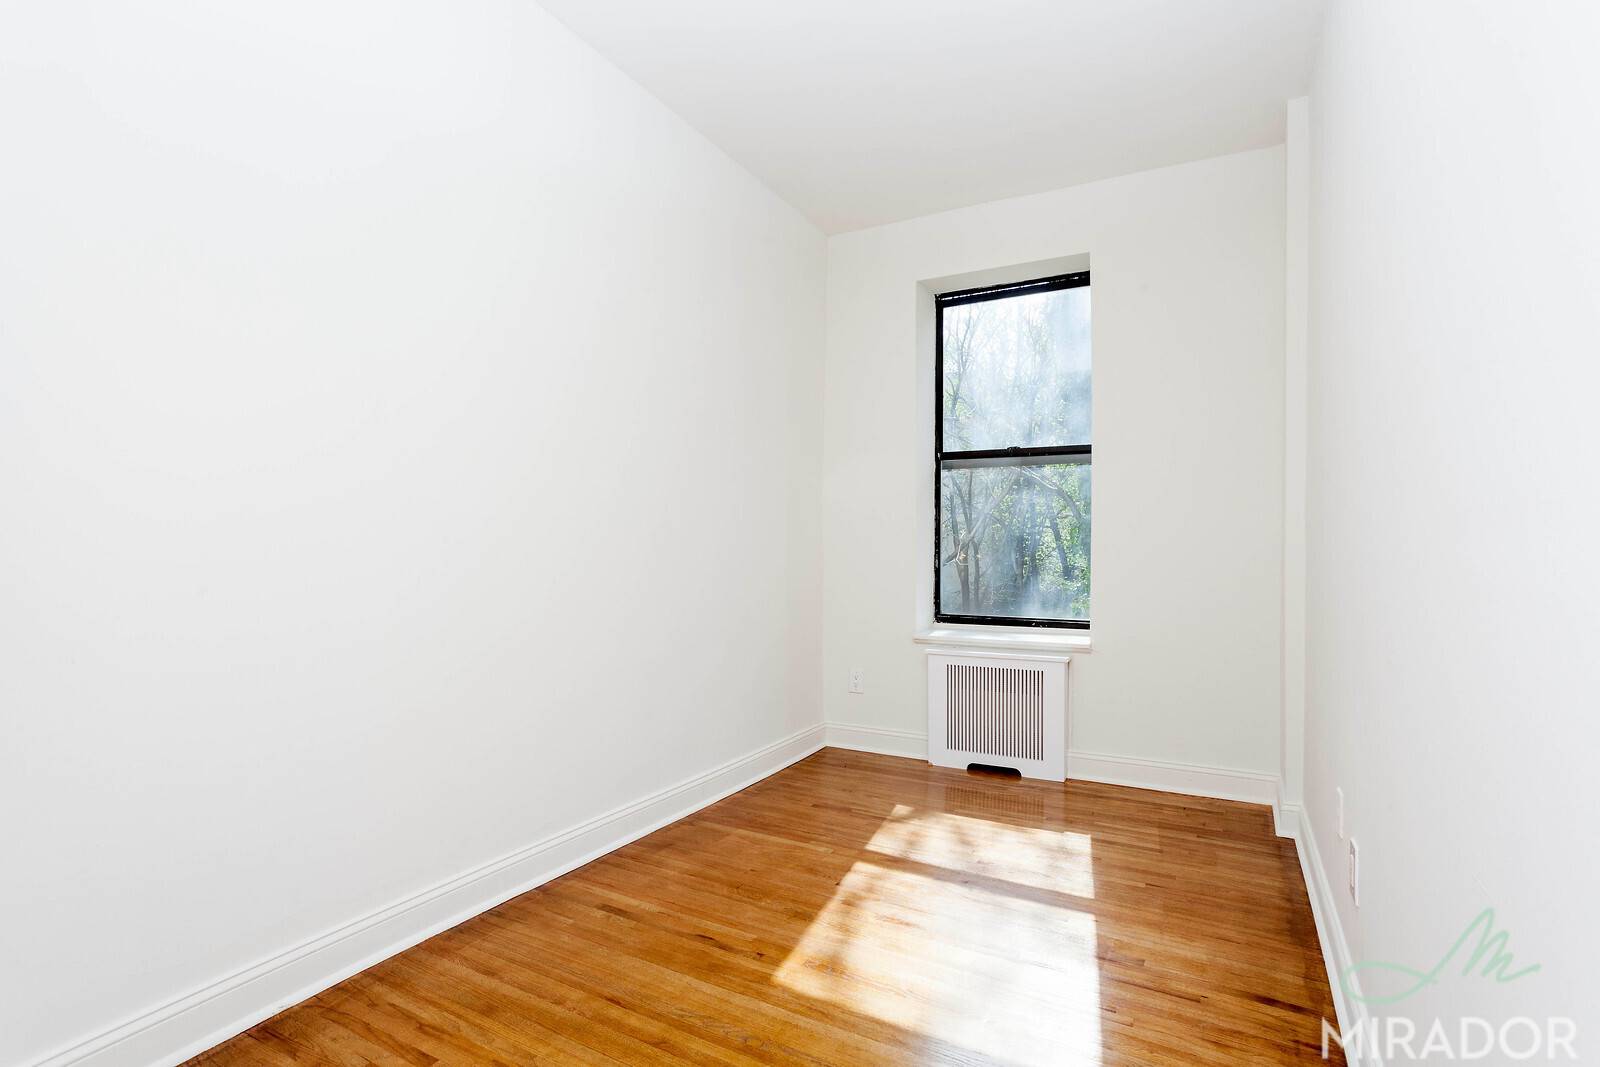 Large, sunny one bedroom apartment with high ceilings, lots of storage space, hardwood floors, dishwasher, and a queen sized bedroom.